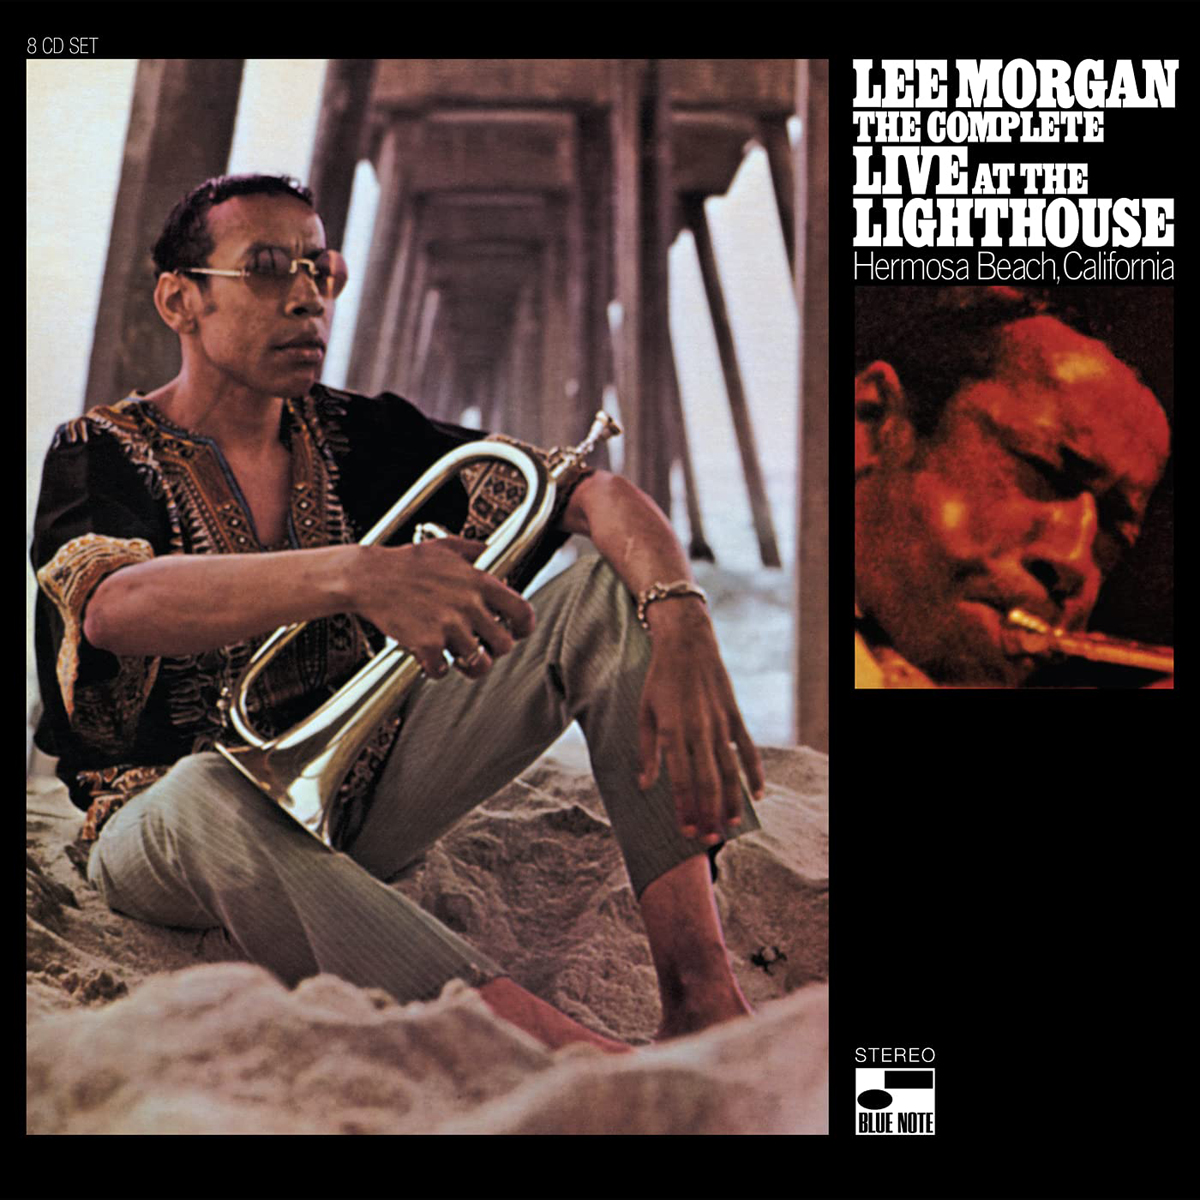 Lee Morgan The Complete Live At The Lighthouse, Hermosa Beach California